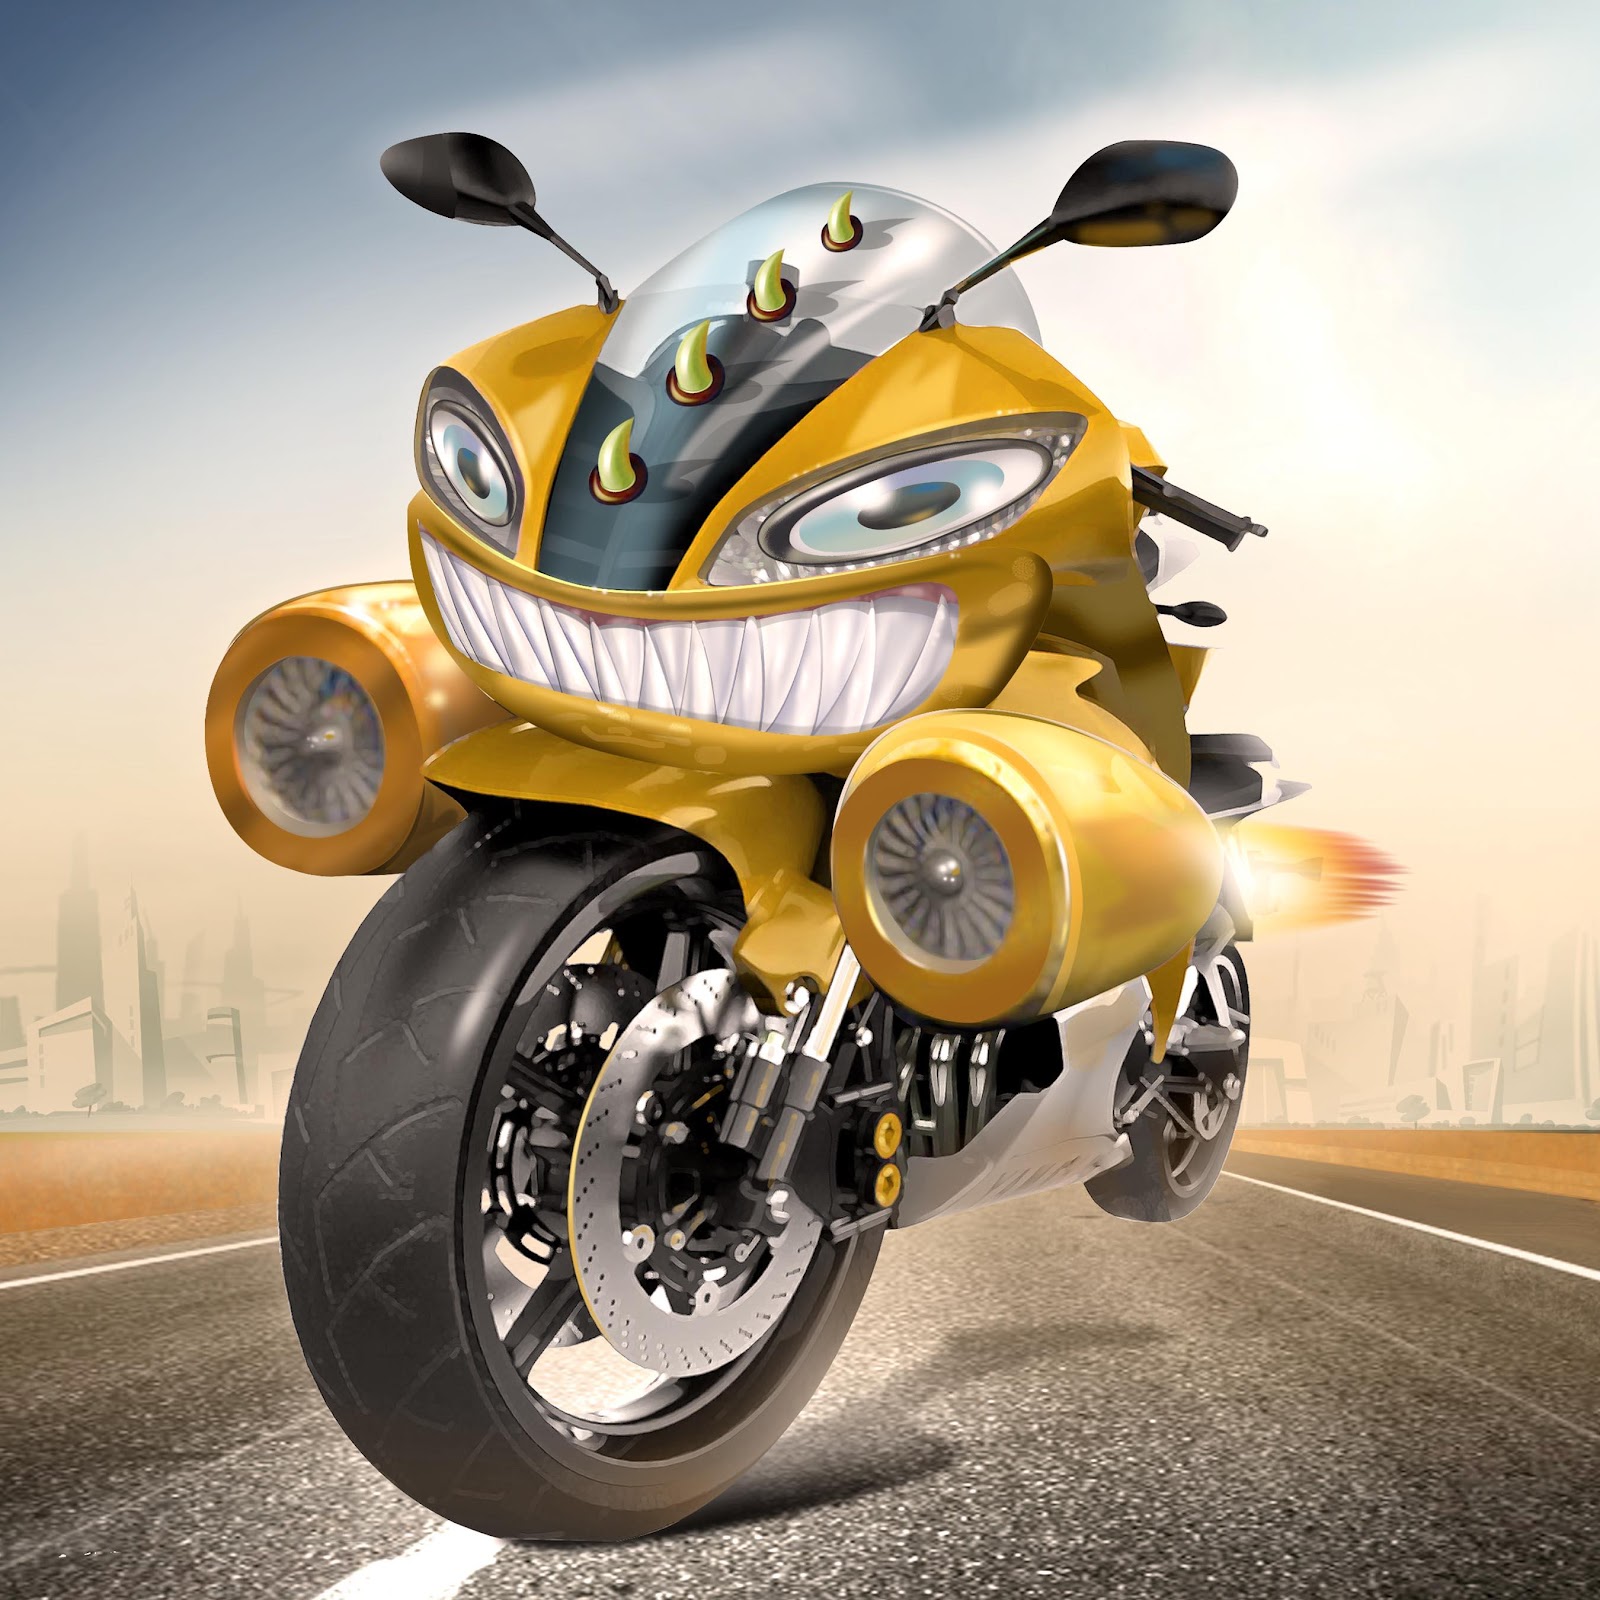 A yellow motorcycle on a road

Description automatically generated with medium confidence